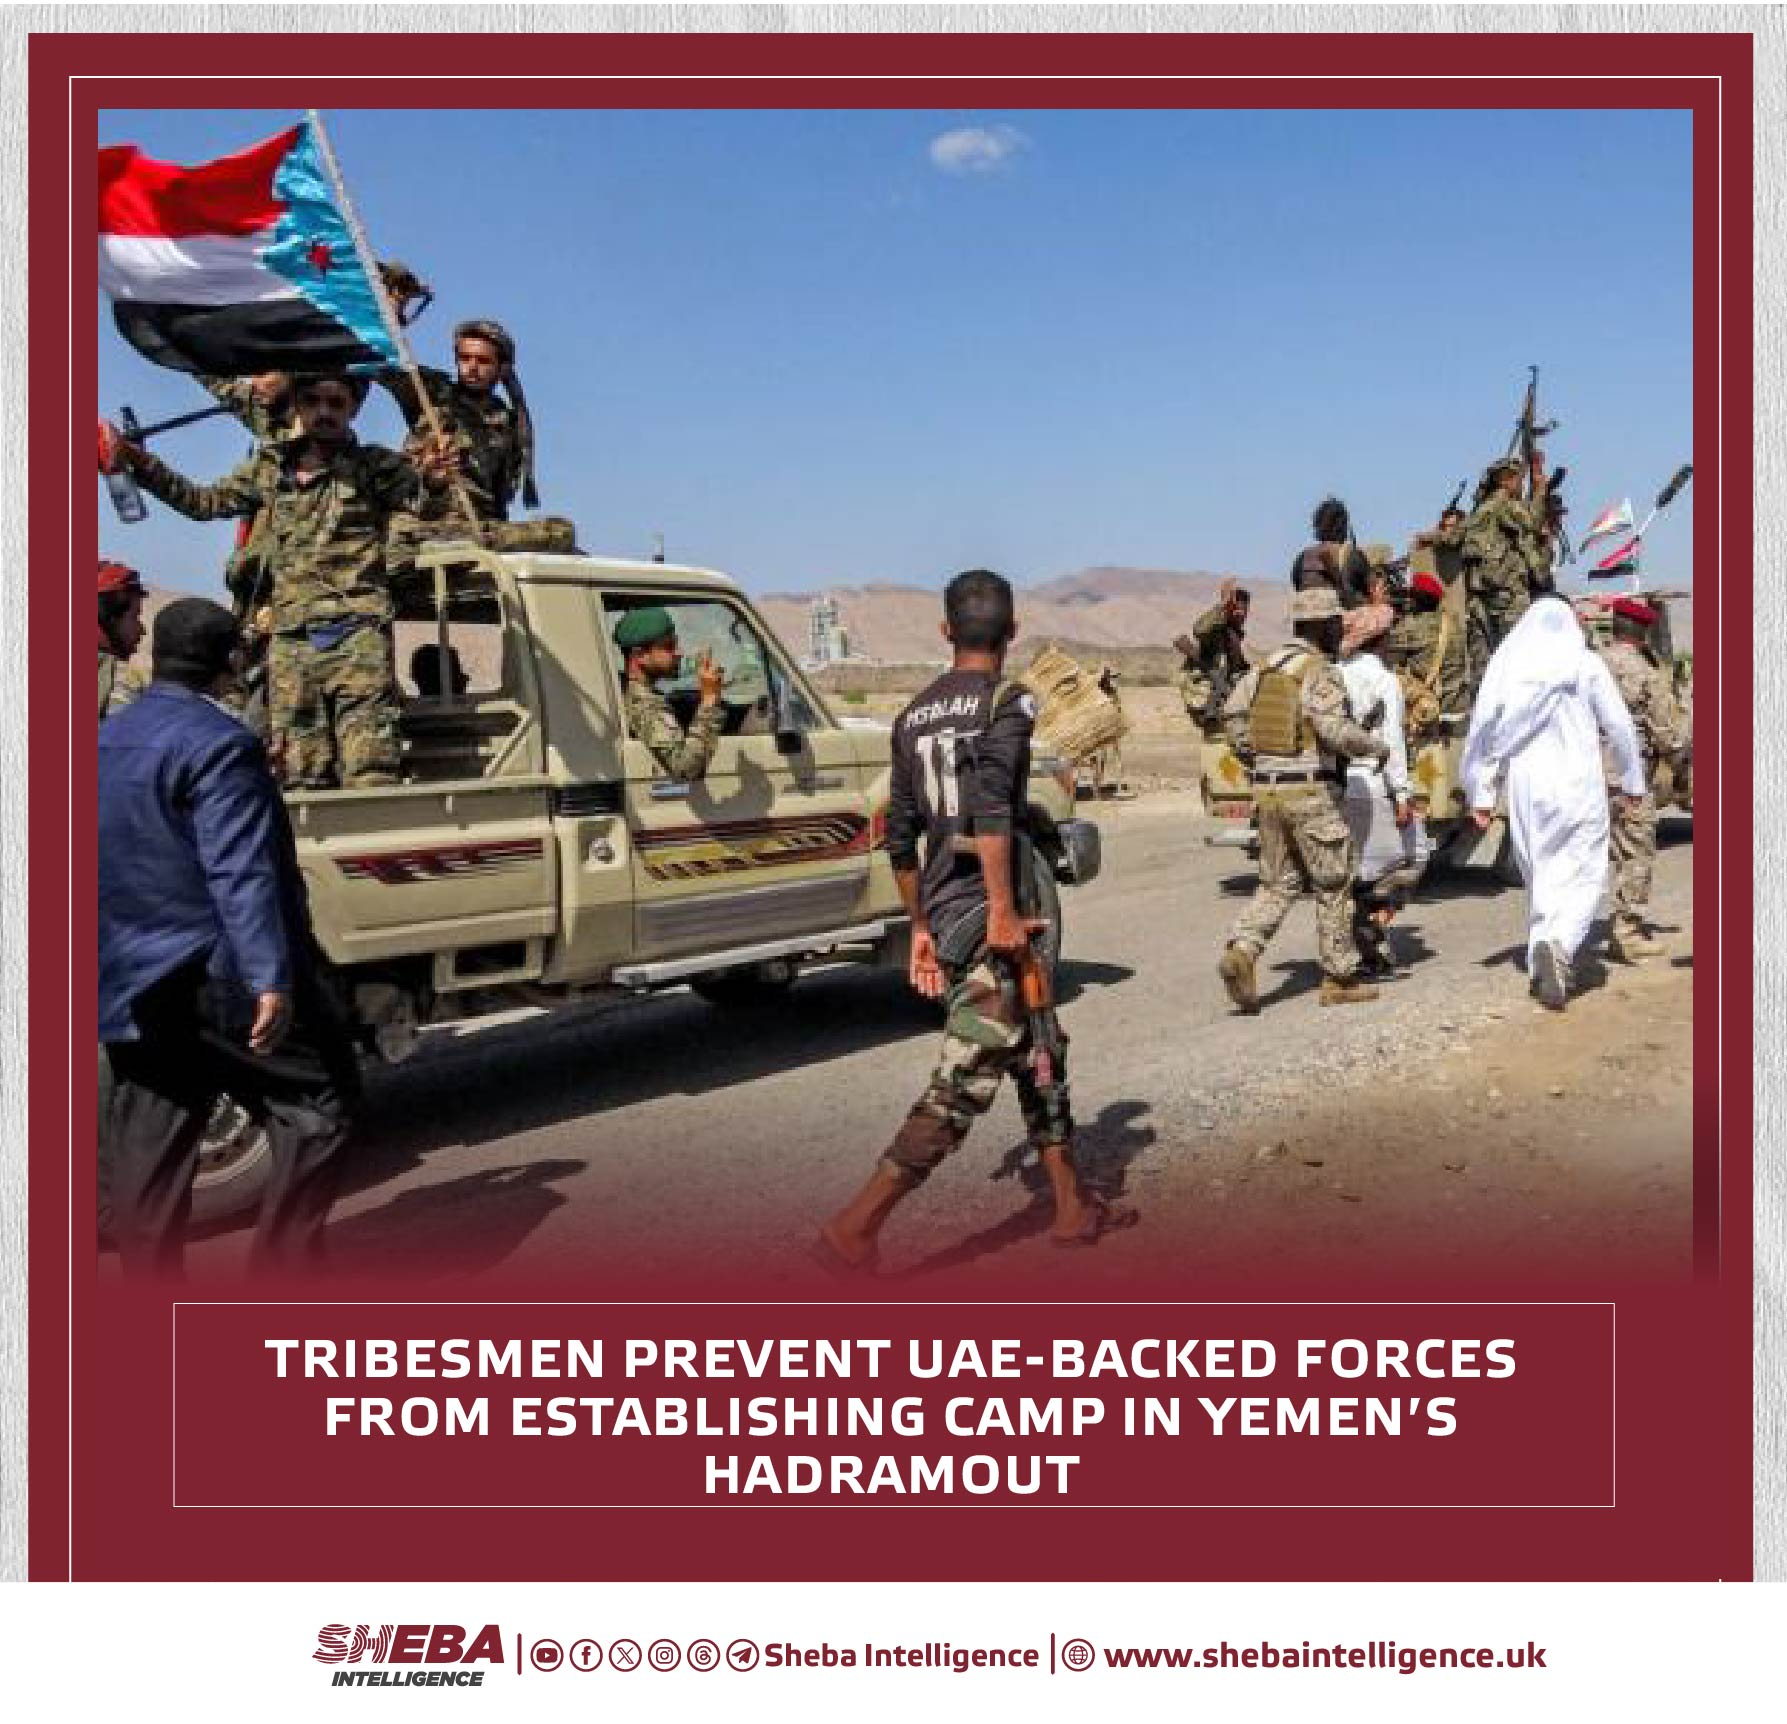 Tribesmen Prevent UAE-backed Forces from Establishing Camp in Yemen's Hadramout